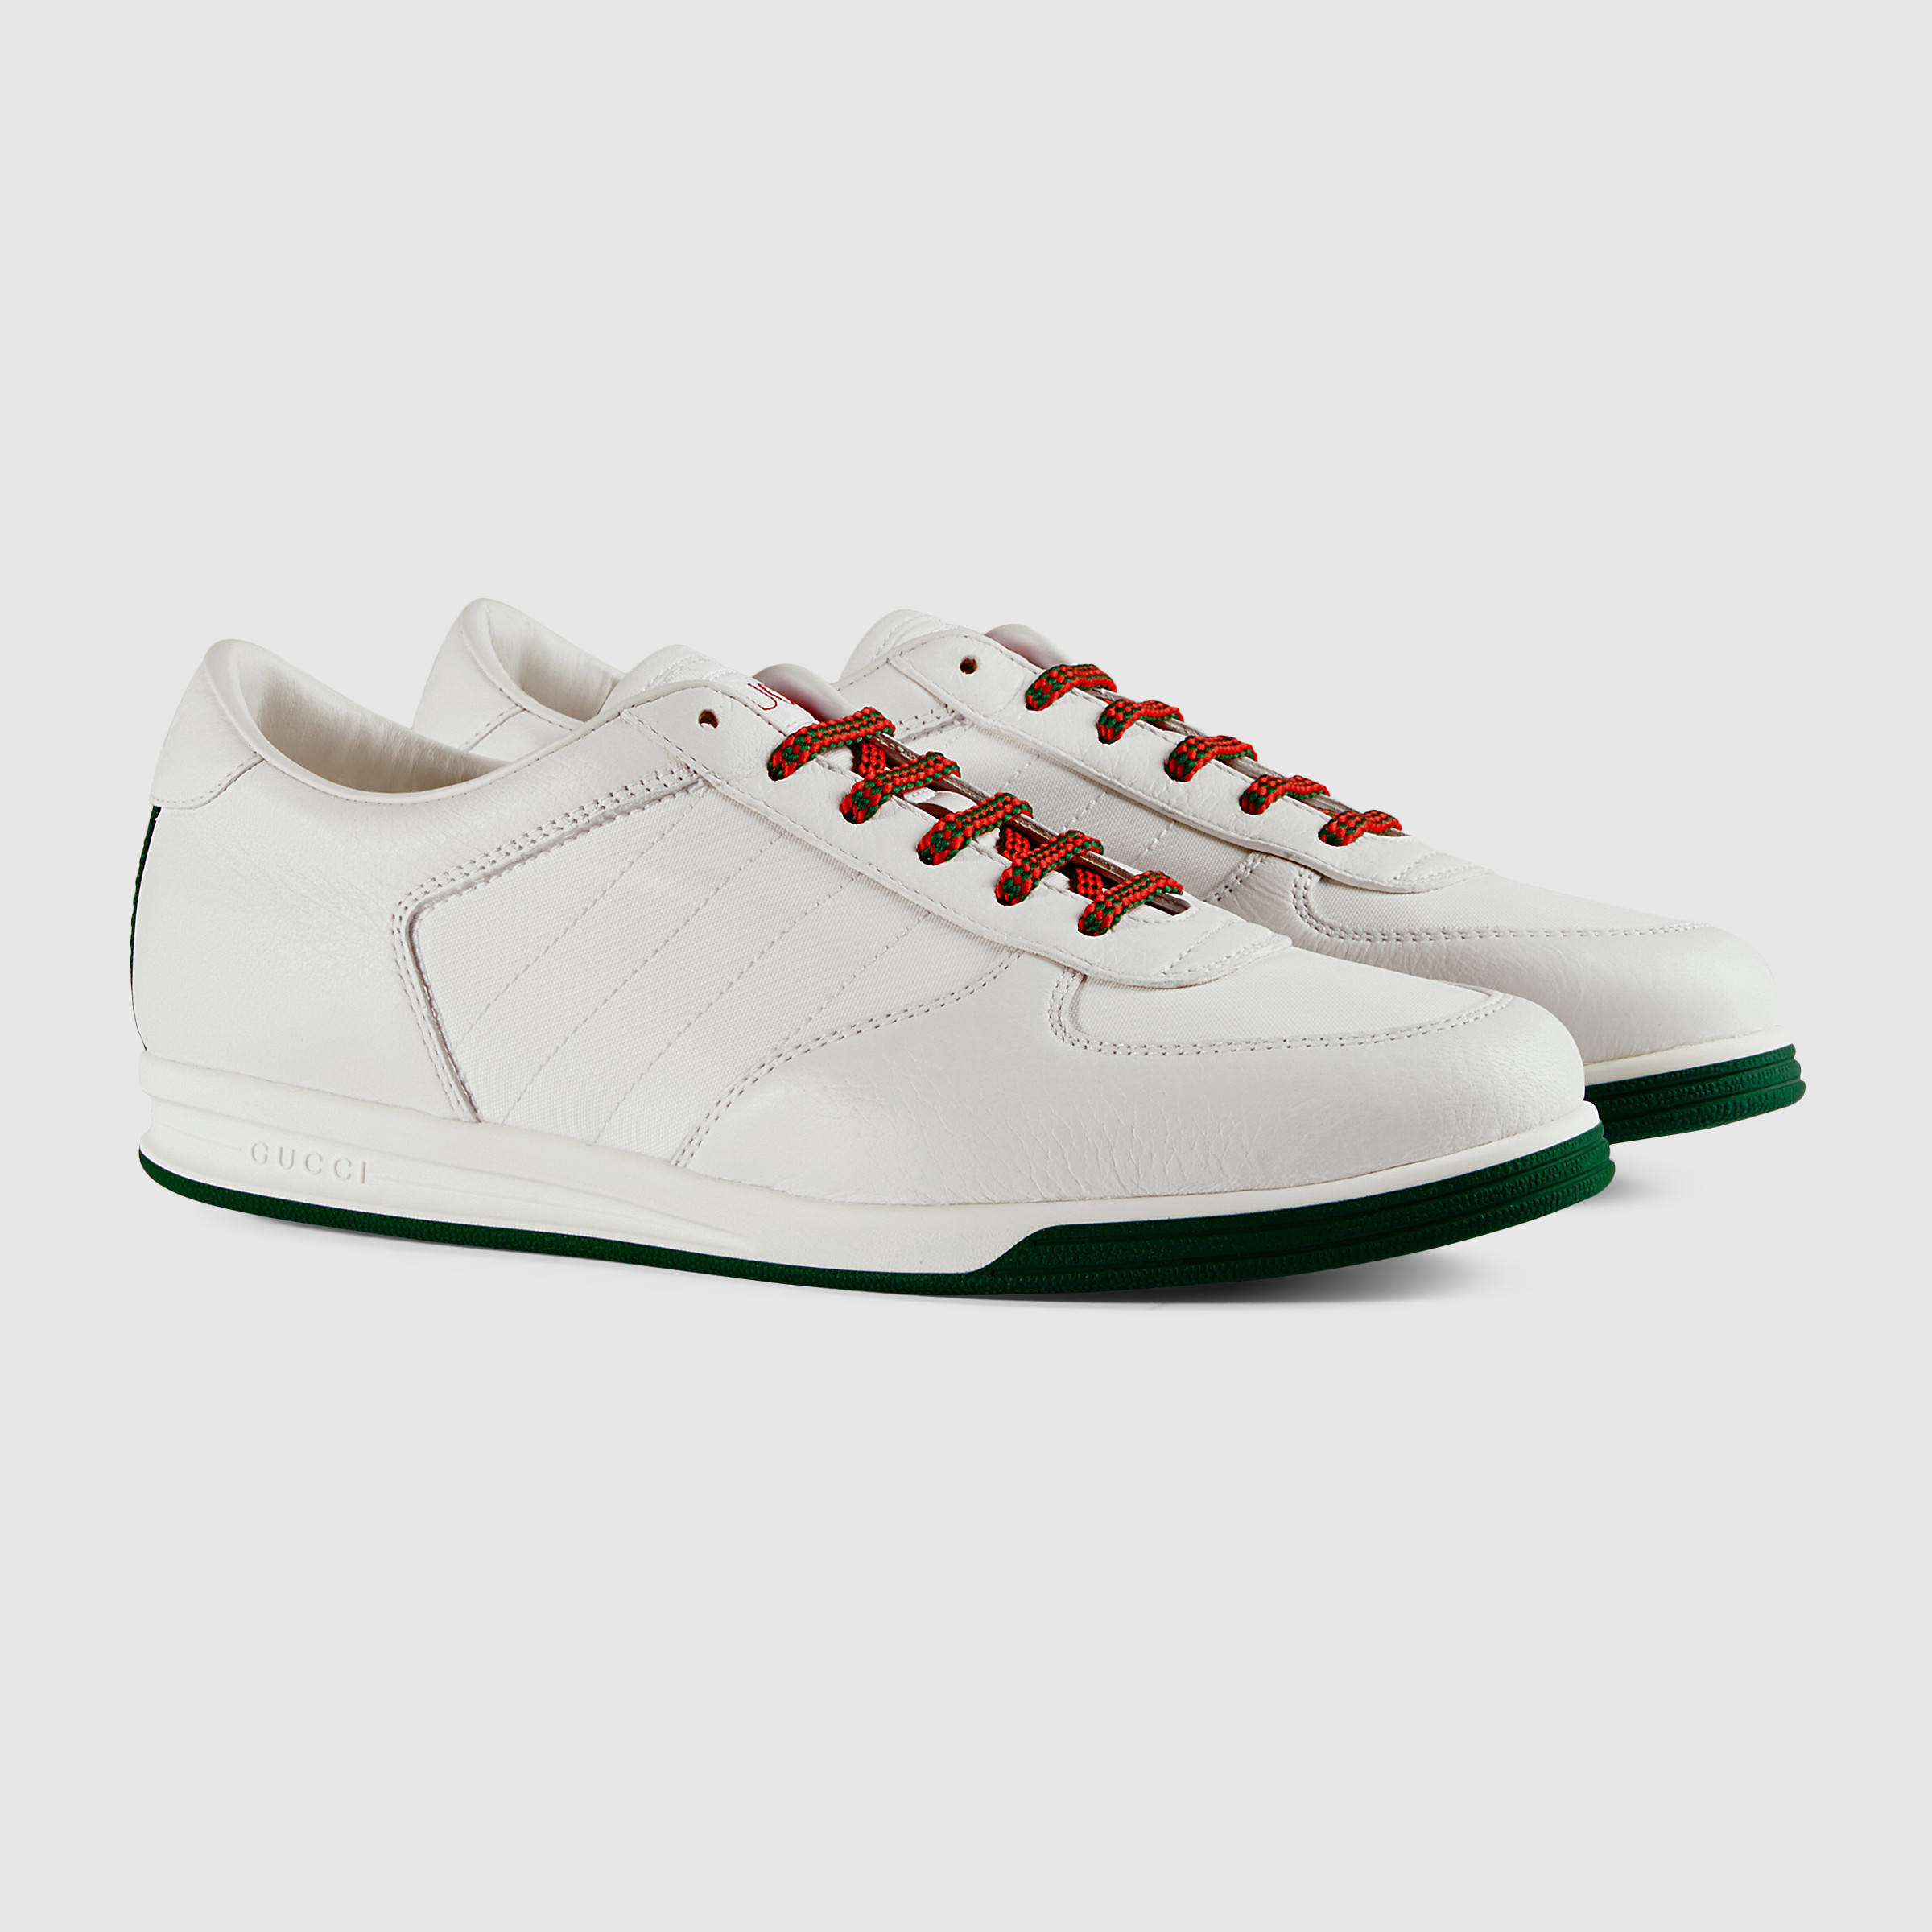 Gucci 1984 Low Top Sneaker In Leather in White